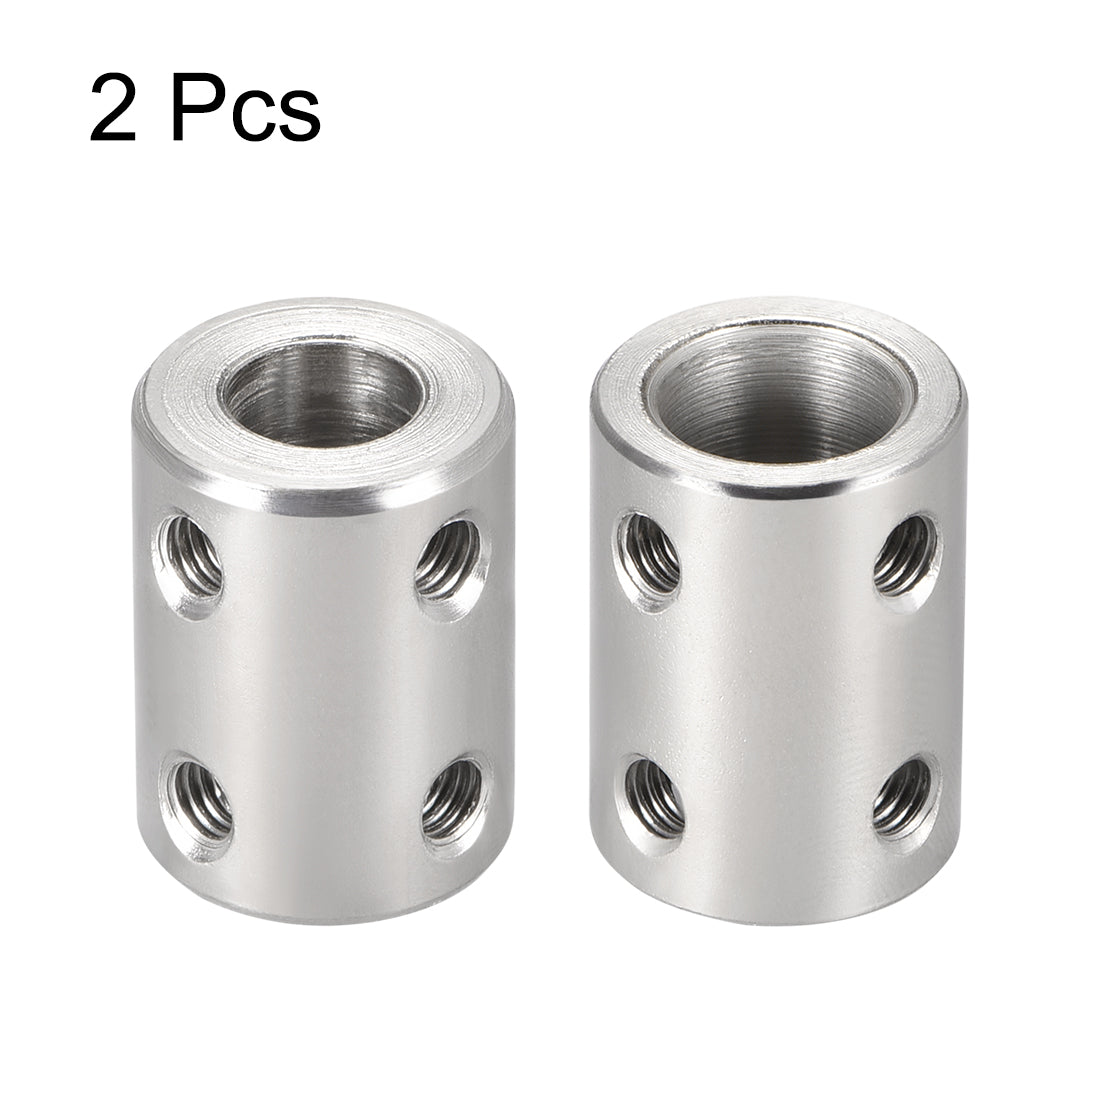 uxcell Uxcell Shaft Coupling 8mm to 10mm L22xD16 Robot Motor Wheel Rigid Coupler Connector Silver Tone 2 Pcs